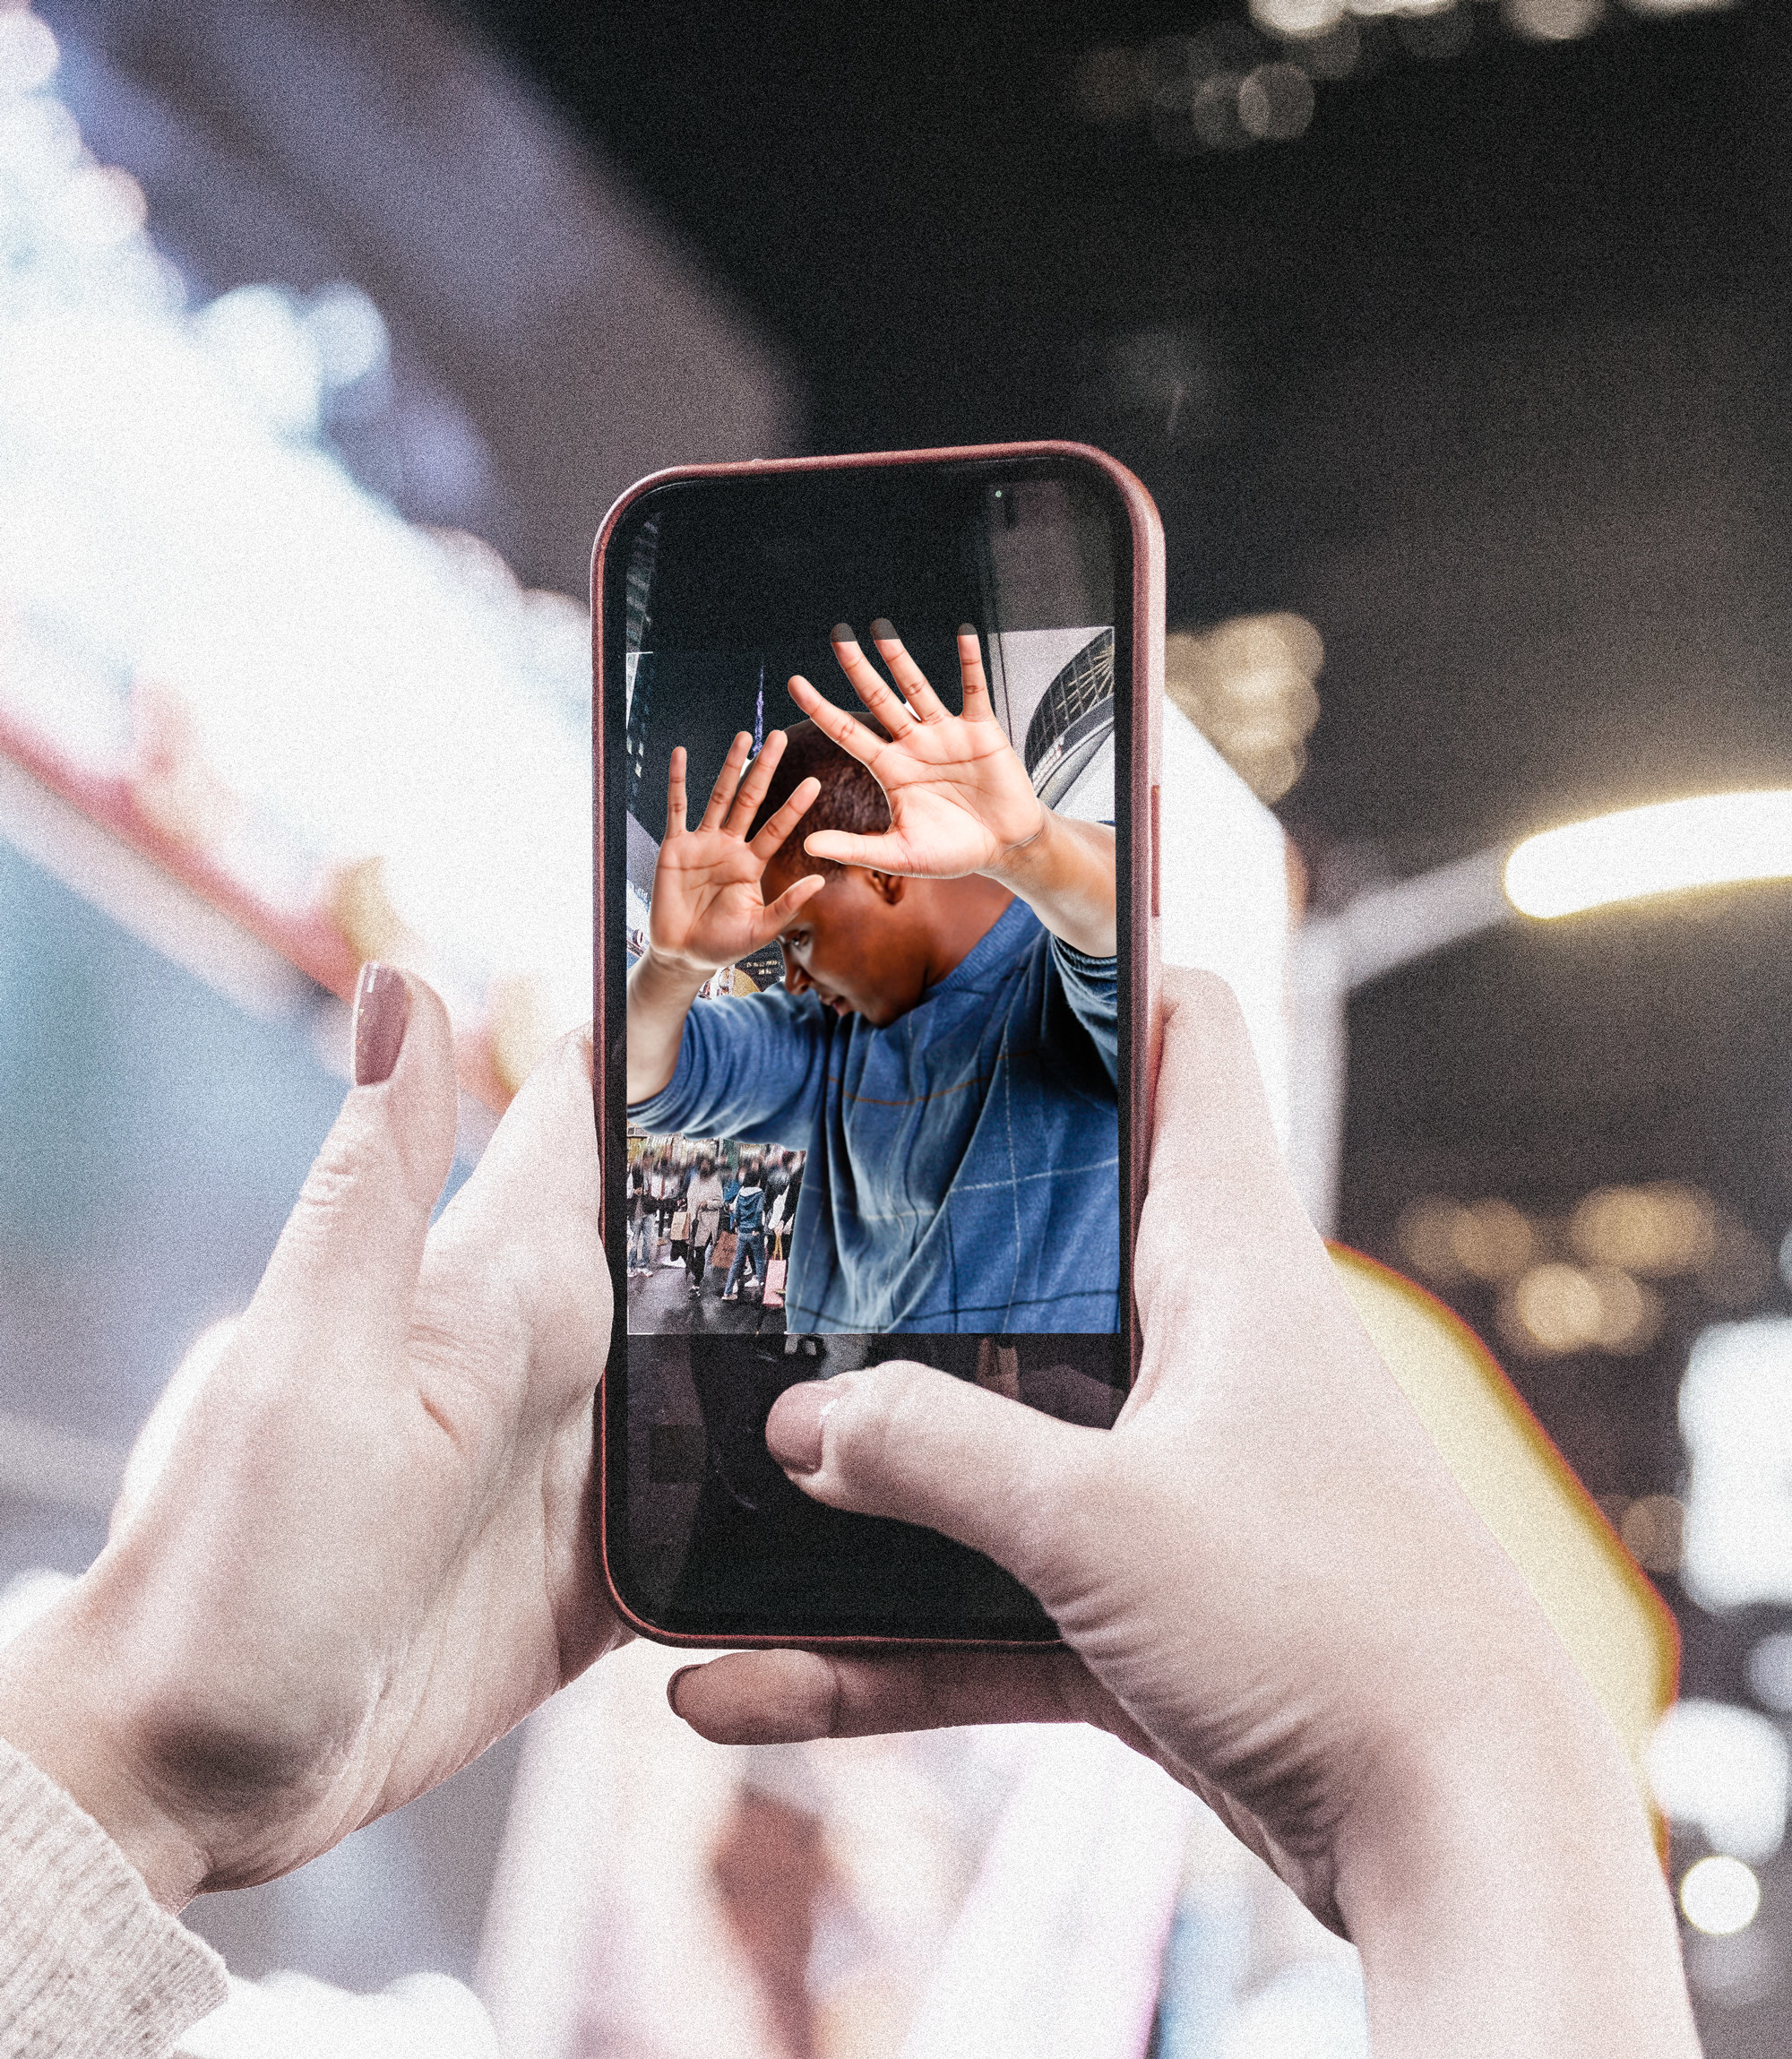 A phone screen&#x27;s camera shows a man shielding his face as someone tries to take a picture of him